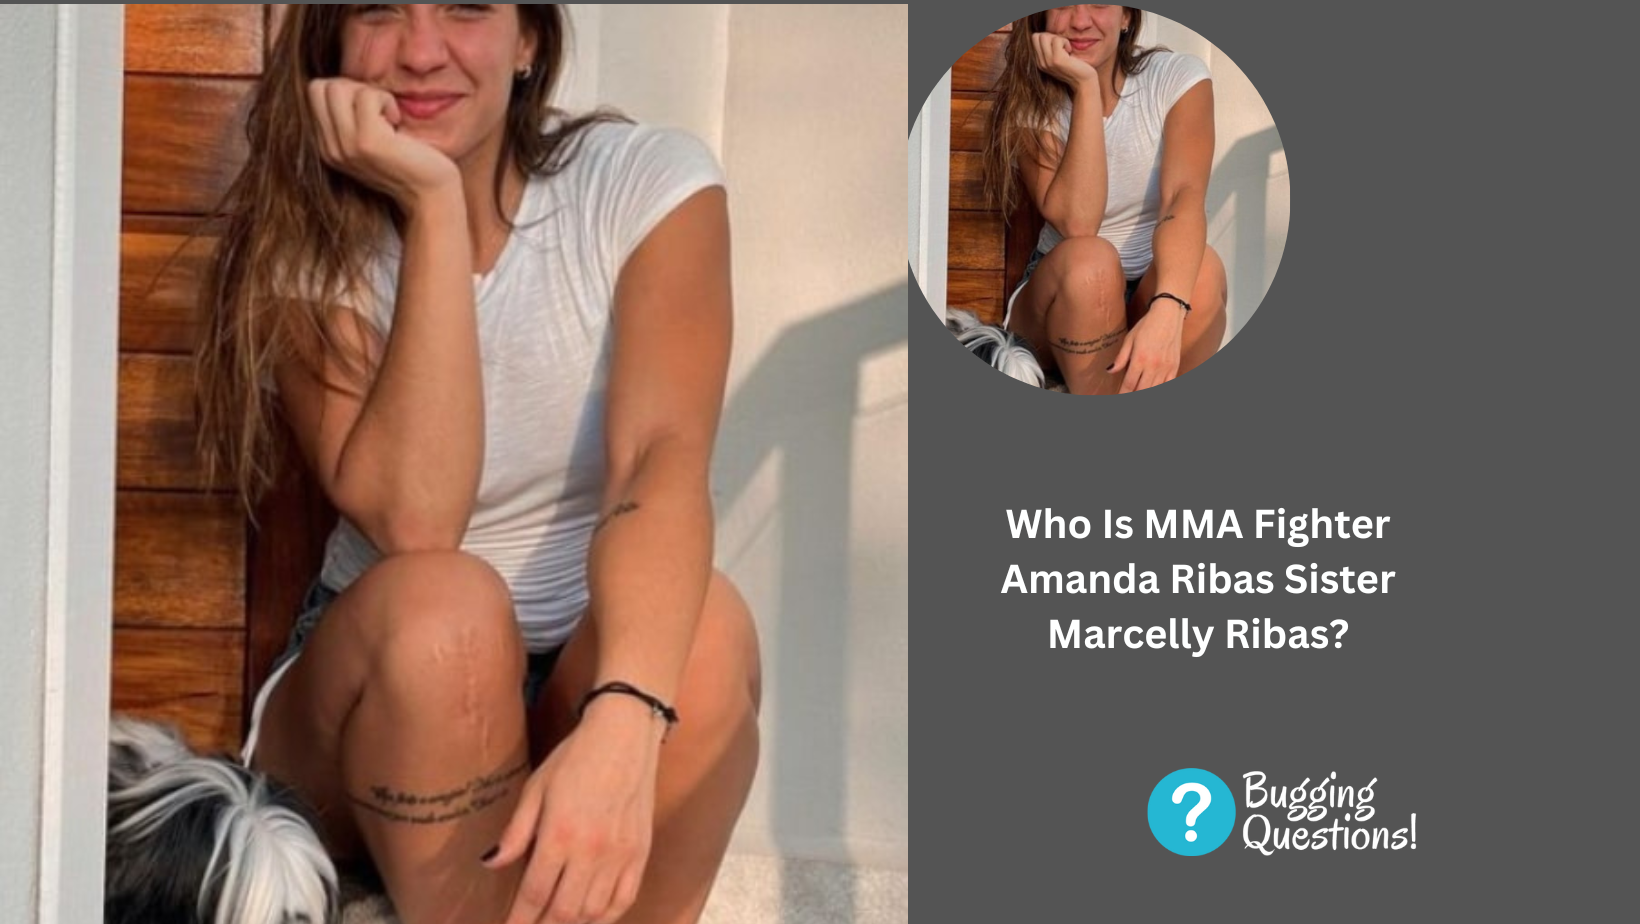 Who Is MMA Fighter Amanda Ribas Sister Marcelly Ribas?